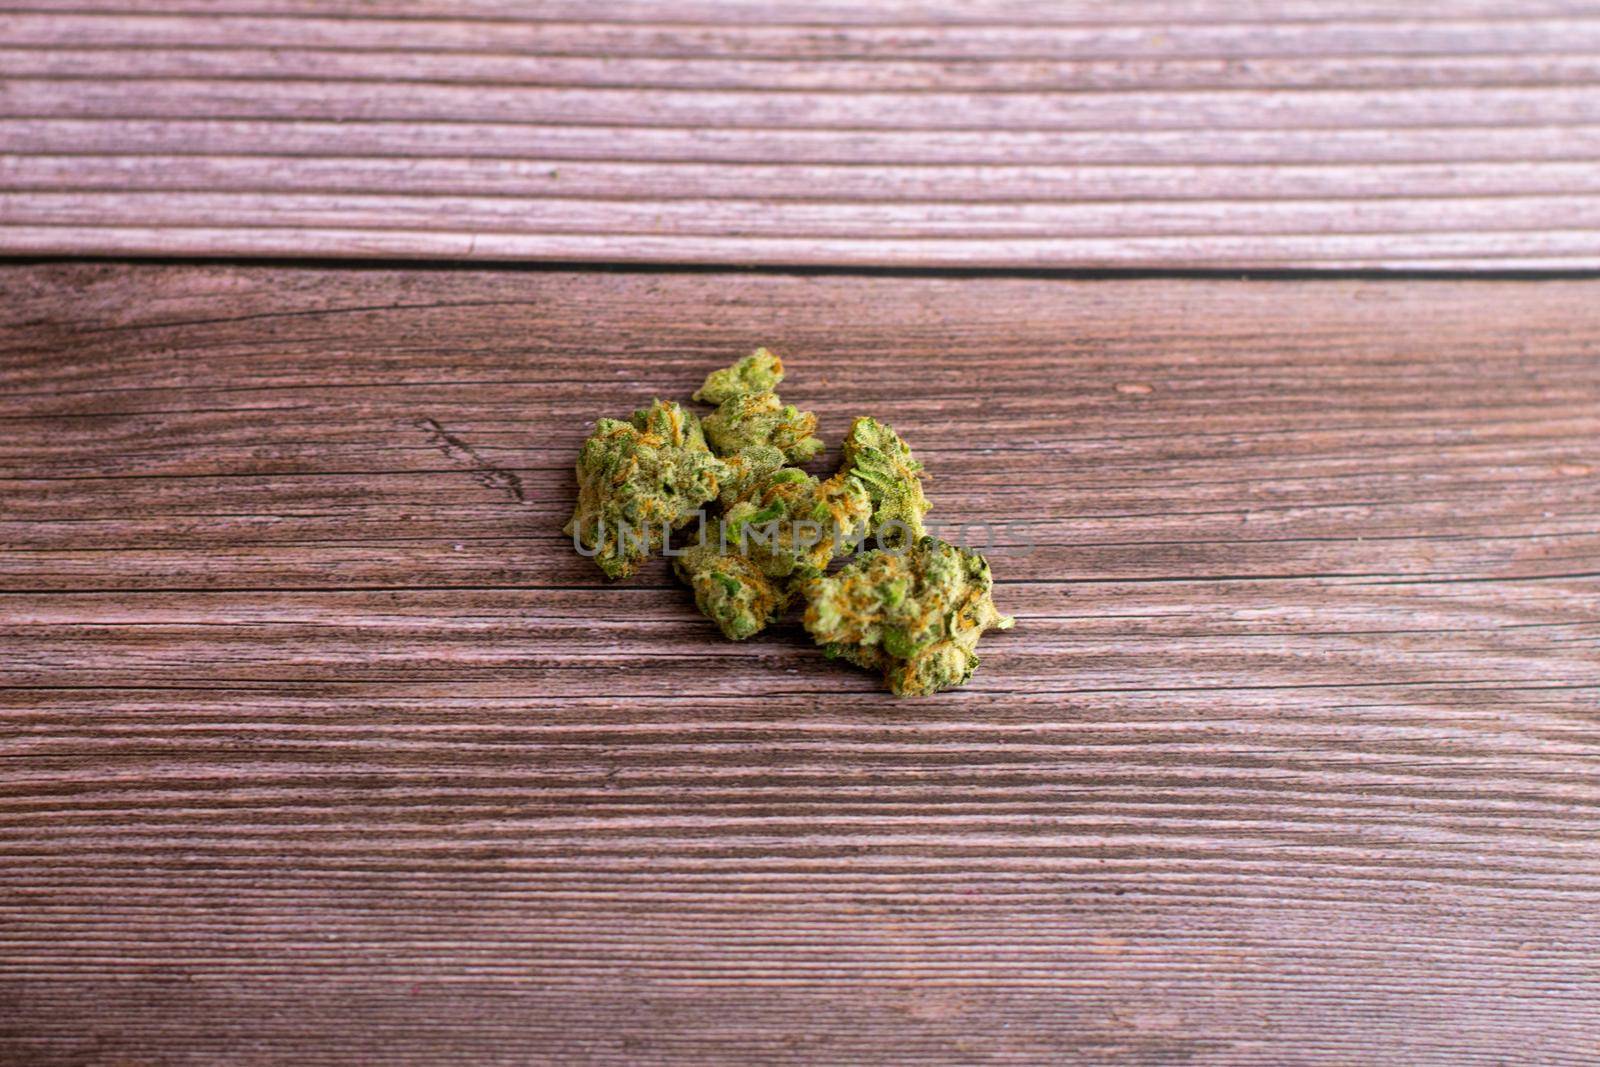 A Small Pile of Bright Green and Orange Medicinal Cannabis on a Brown Wooden Background